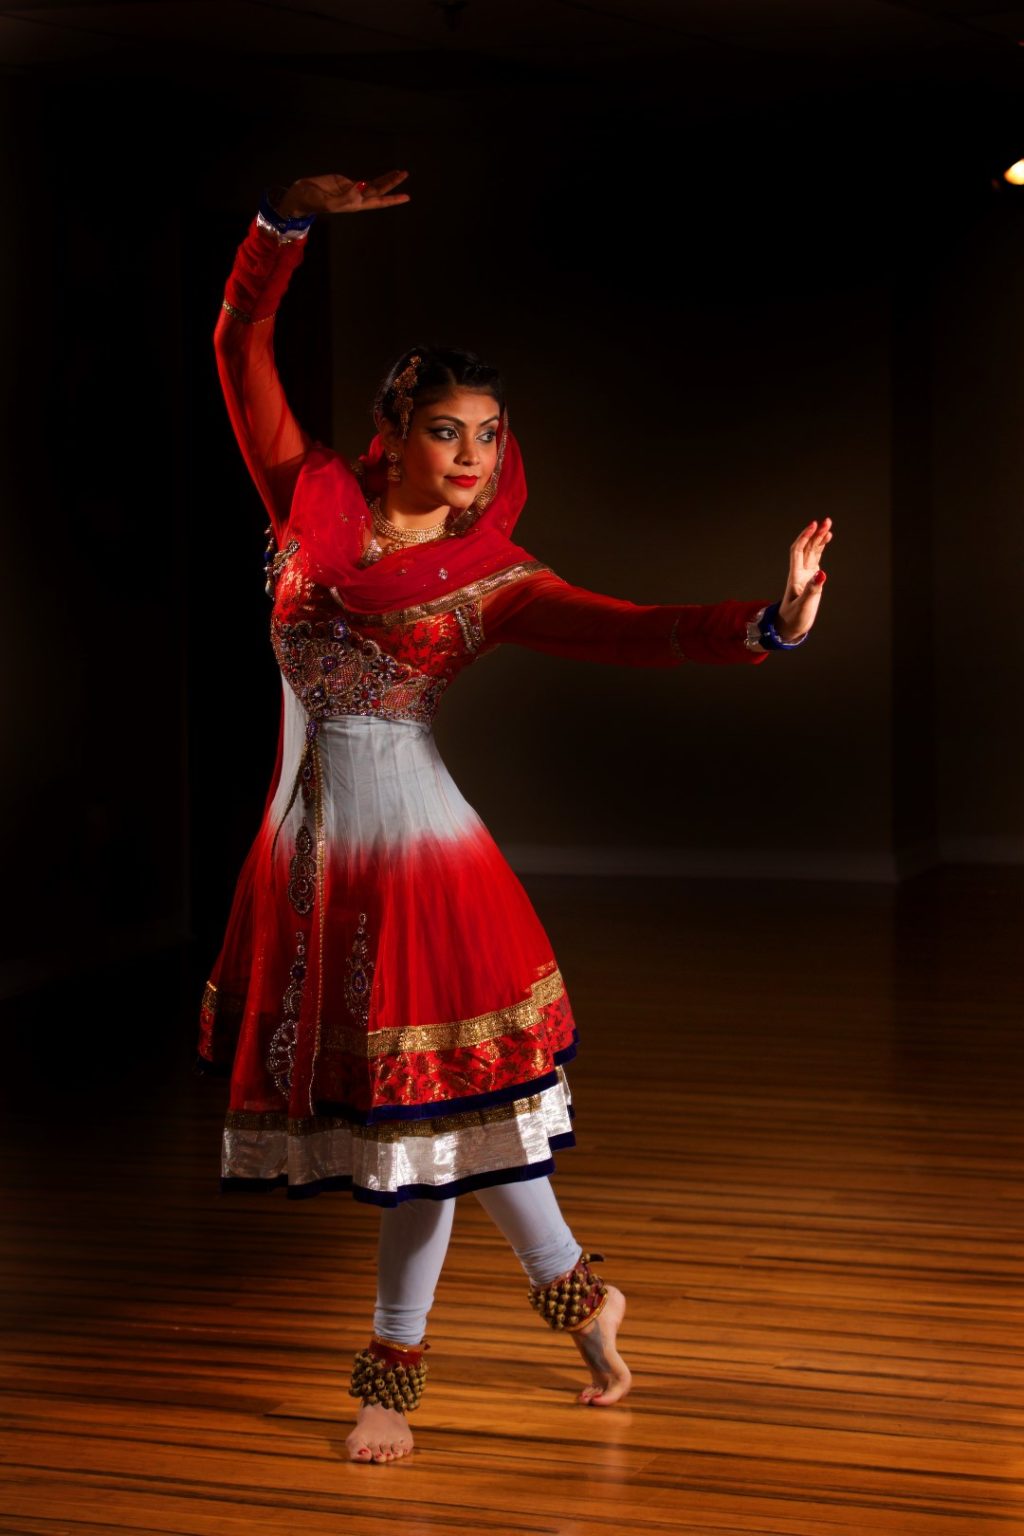 Reba Browne is committed to promoting the love of culture by bringing the vibrance and grace of Indian dance to everyone.